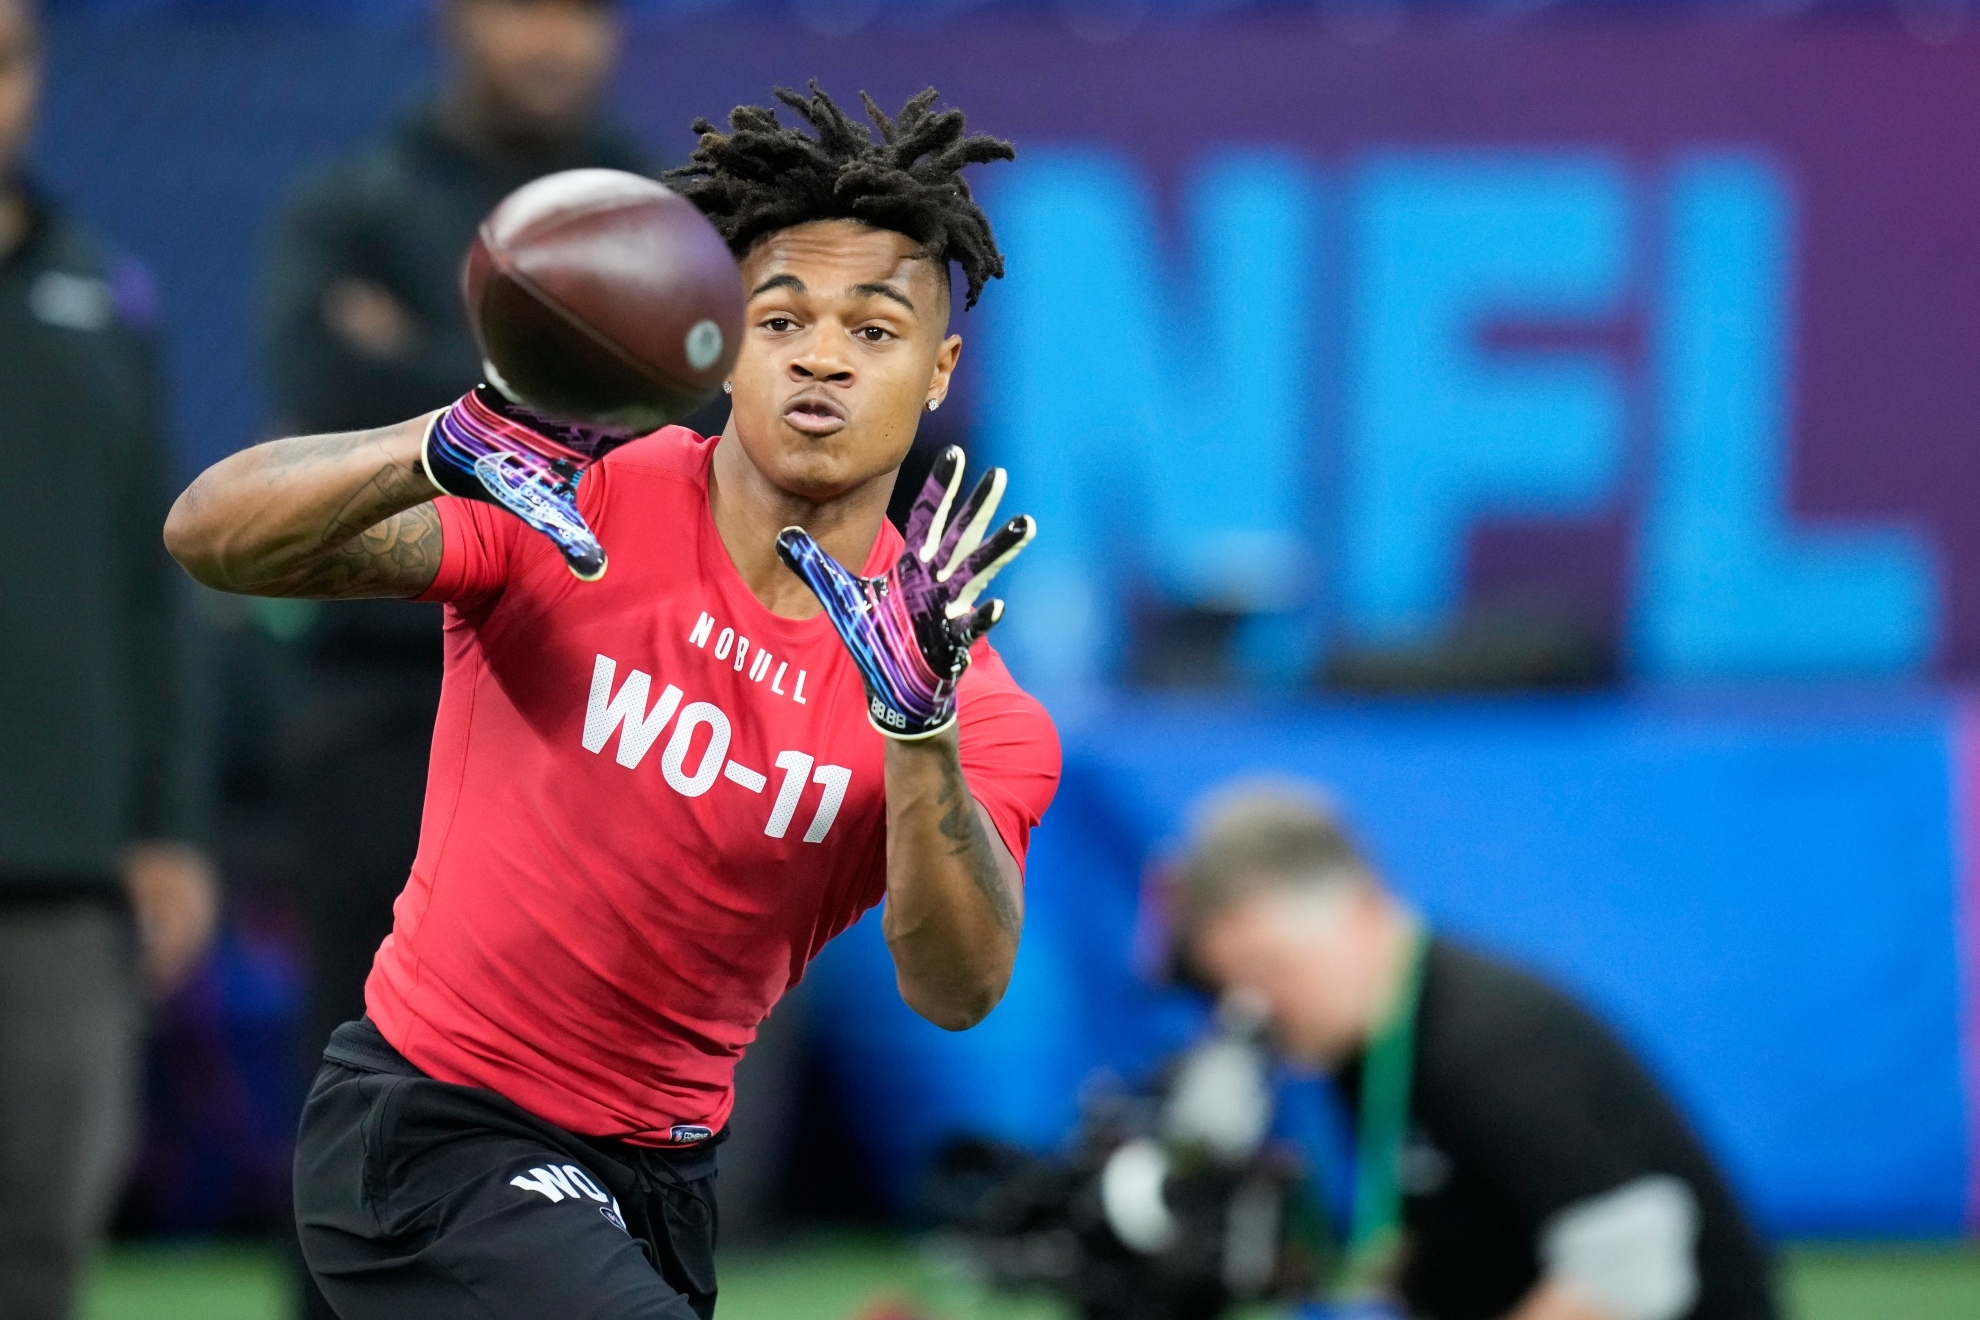 Houston Texans' 2023 NFL Draft pay off: Nathaniel 'Tank' Dell proving to be a game-changer